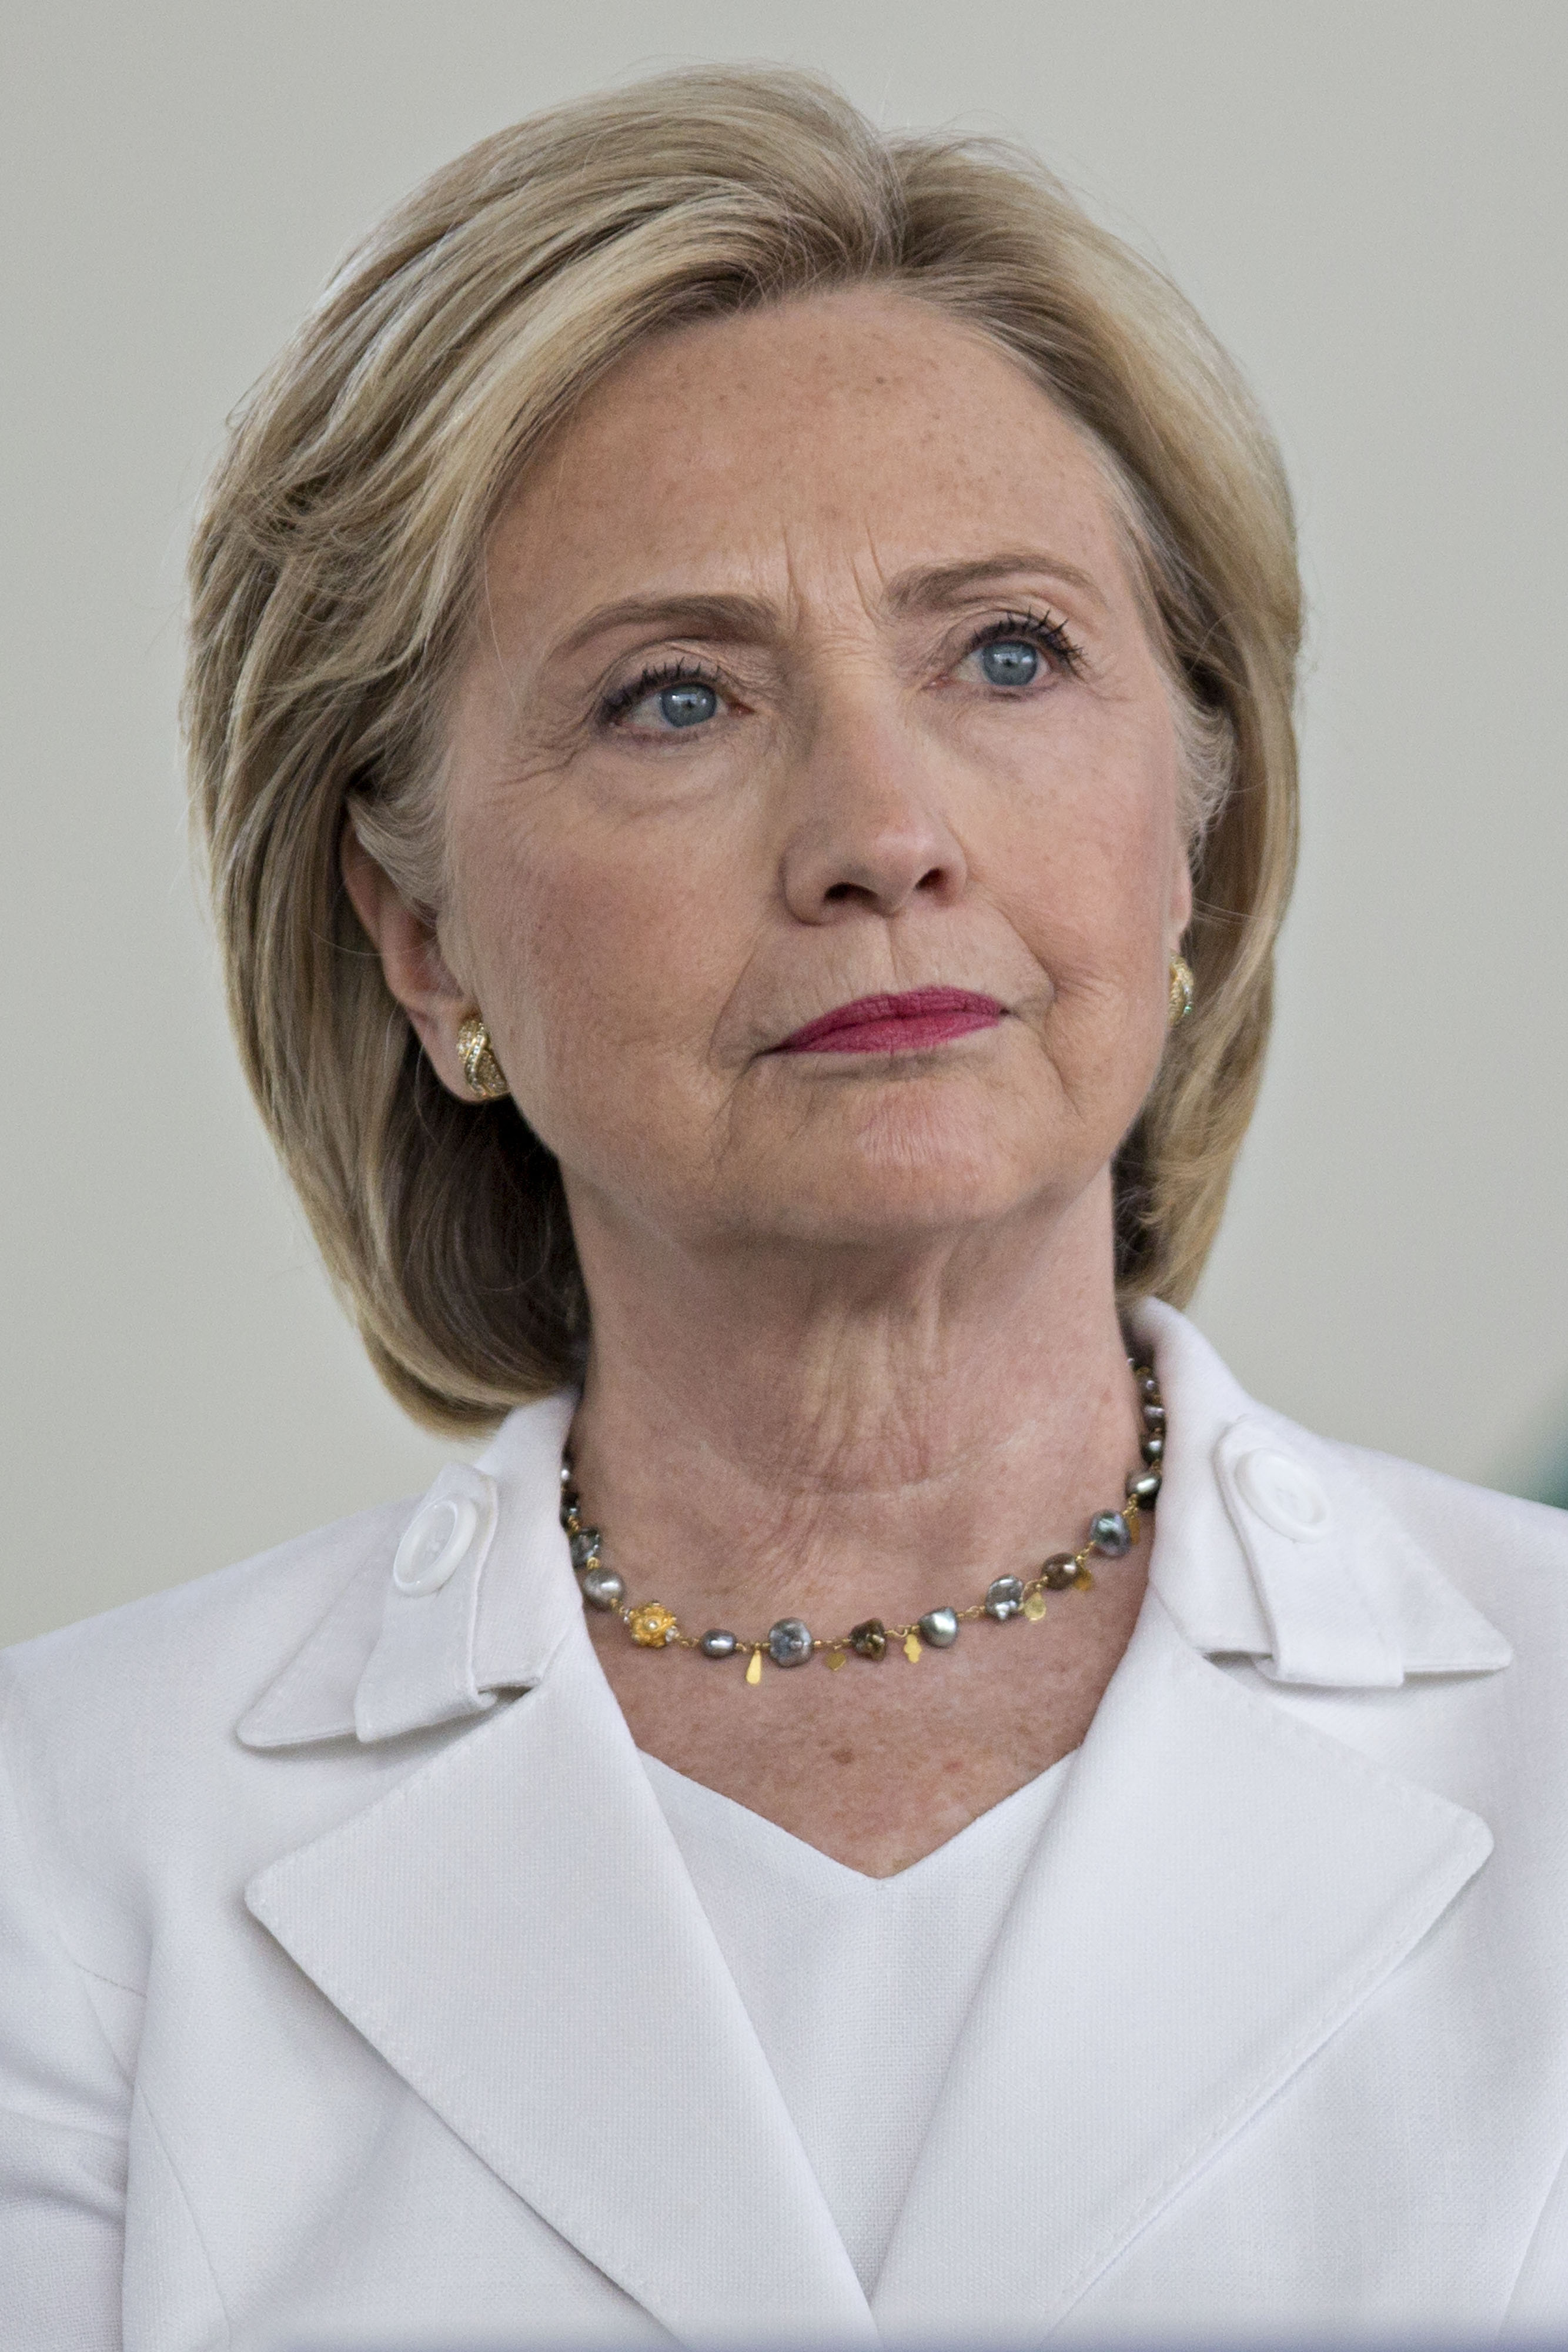 Hillary Clinton, former U.S. secretary of state and 2016 Democratic presidential candidate, listens during her introduction at an event in Ankeny, Iowa, on Aug. 26, 2015. (Daniel Acker—Bloomberg/Getty Images)